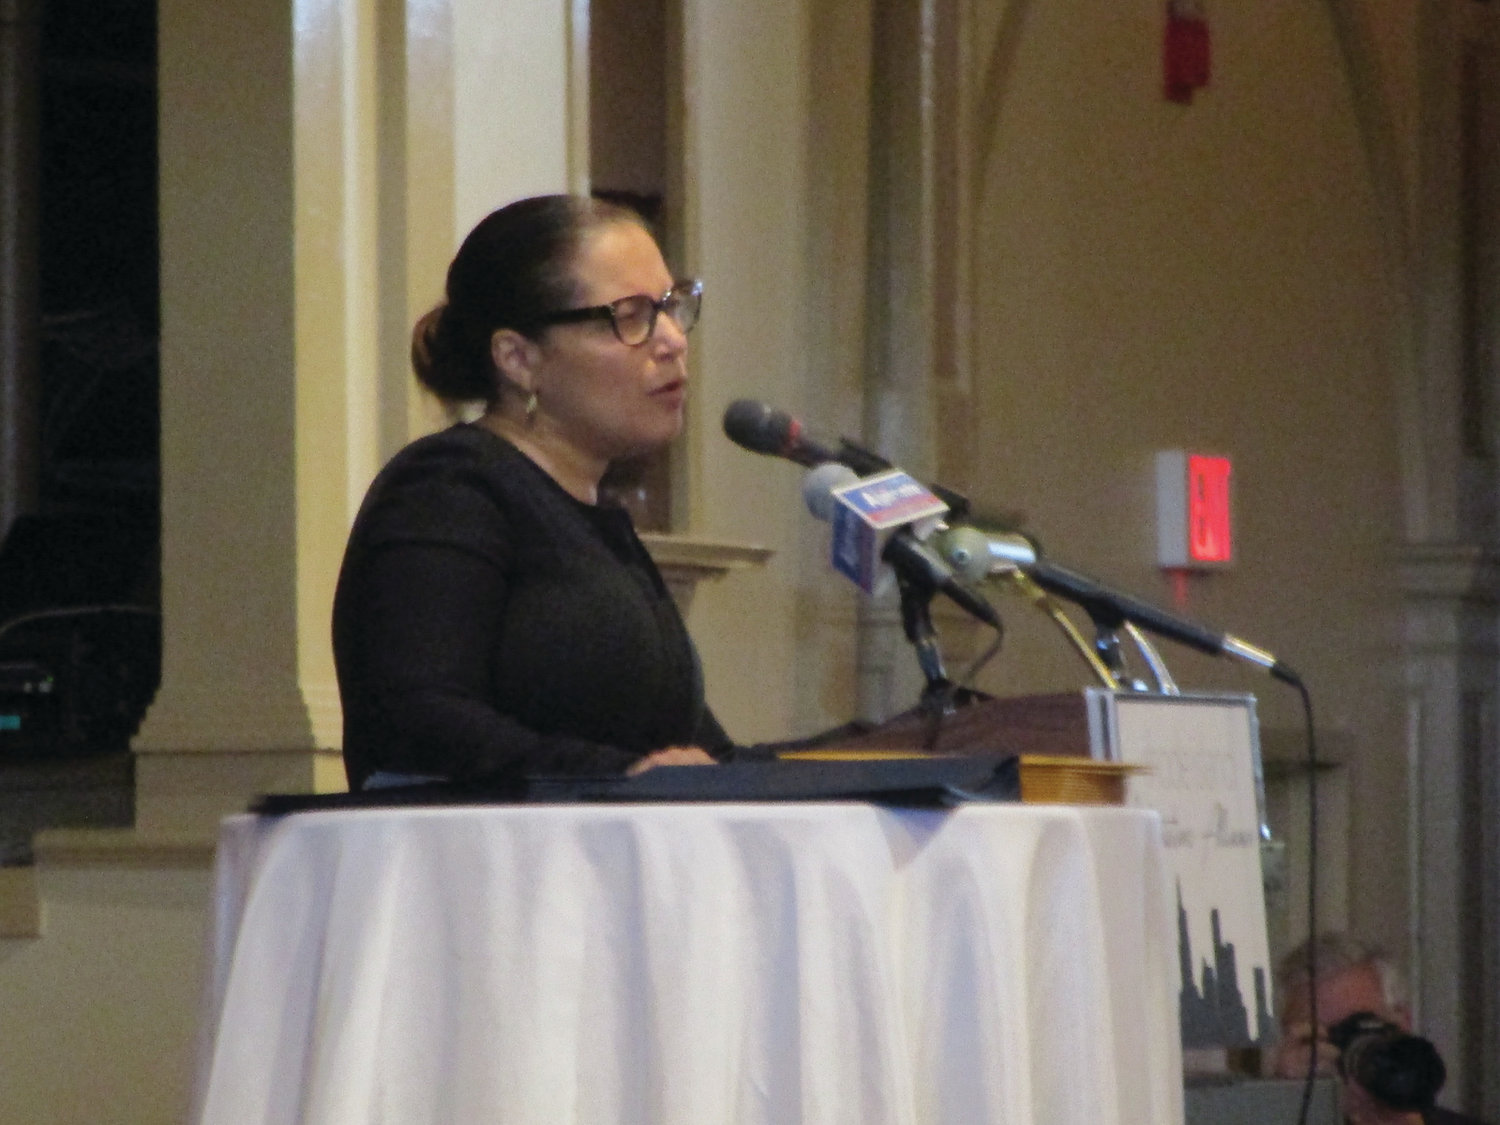 POWERFUL MESSAGE: Education Commissioner Angélica Infante-Green drew a standing ovation for her remarks, in which she spoke bluntly about the state’s failures in terms of equity.